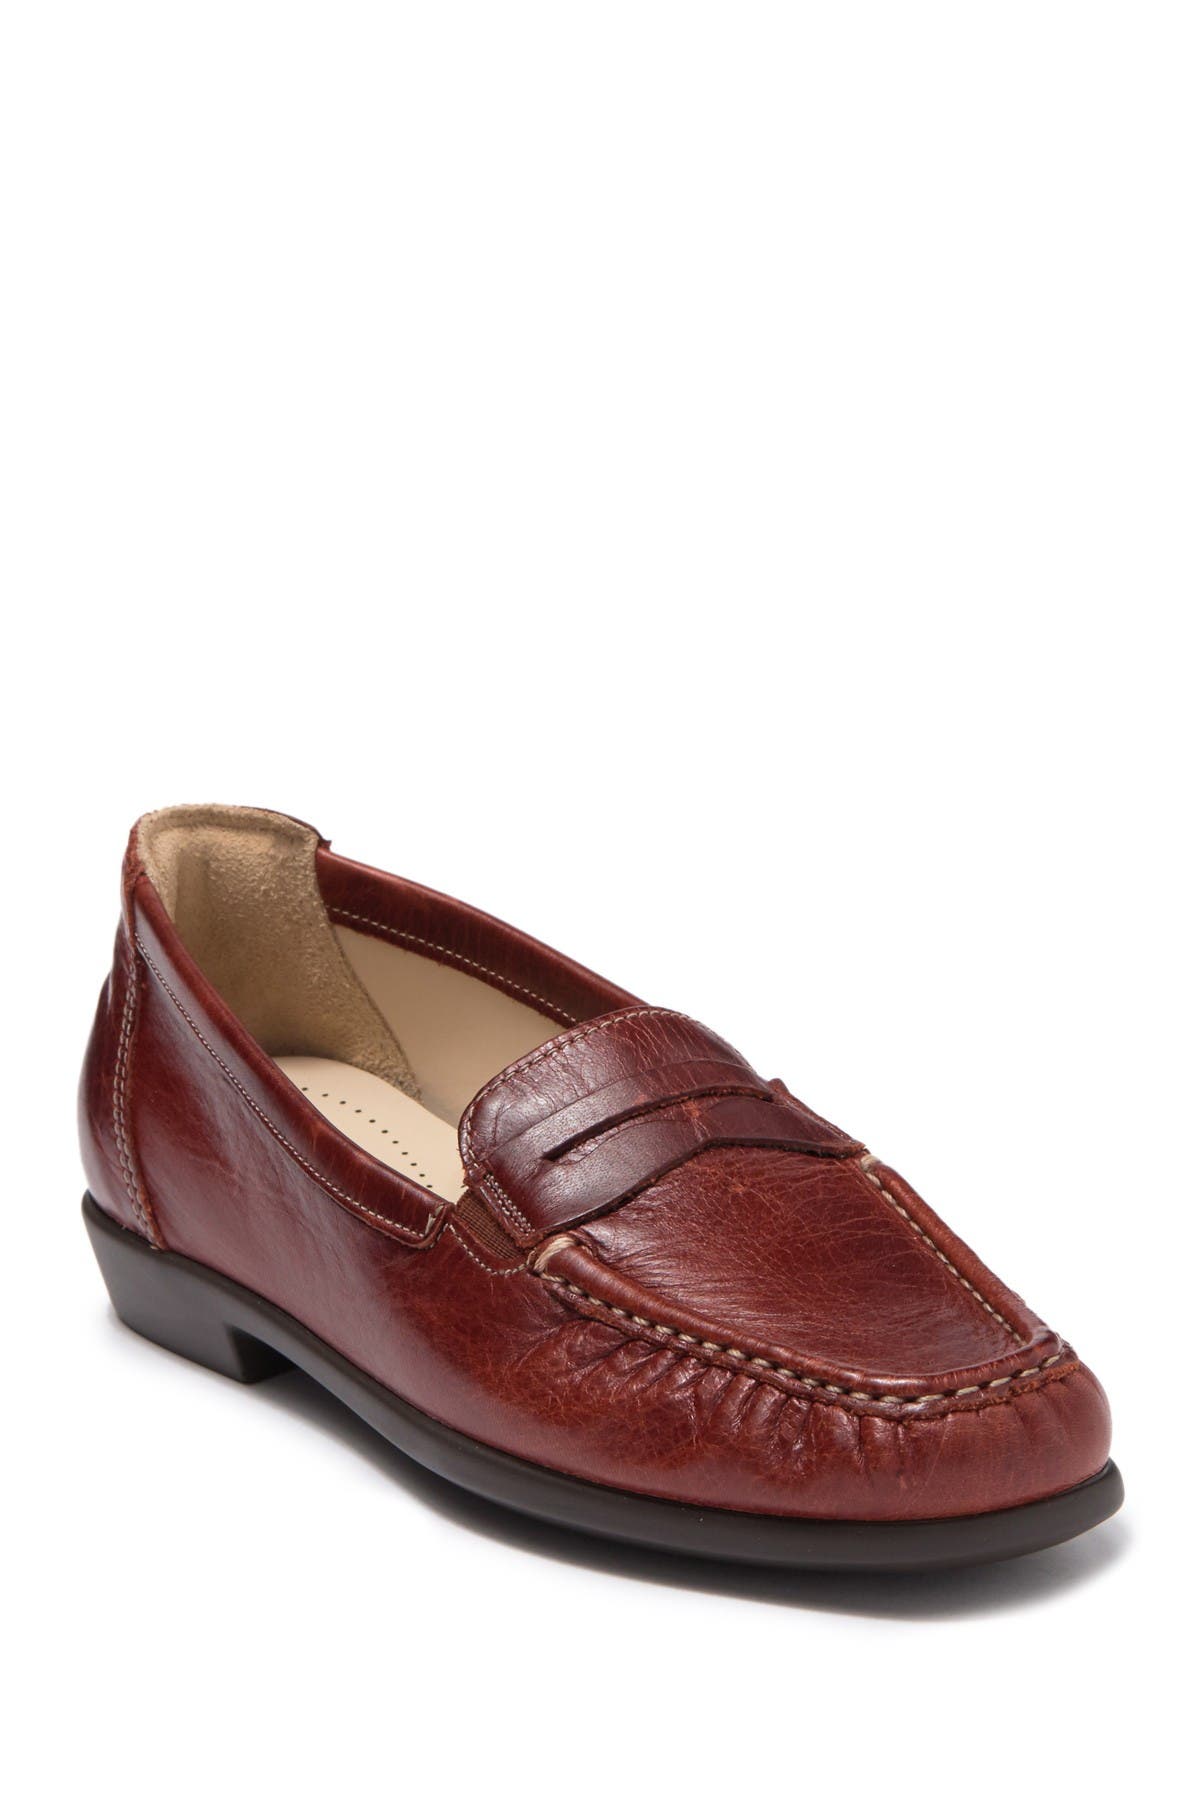 sas womens penny loafers